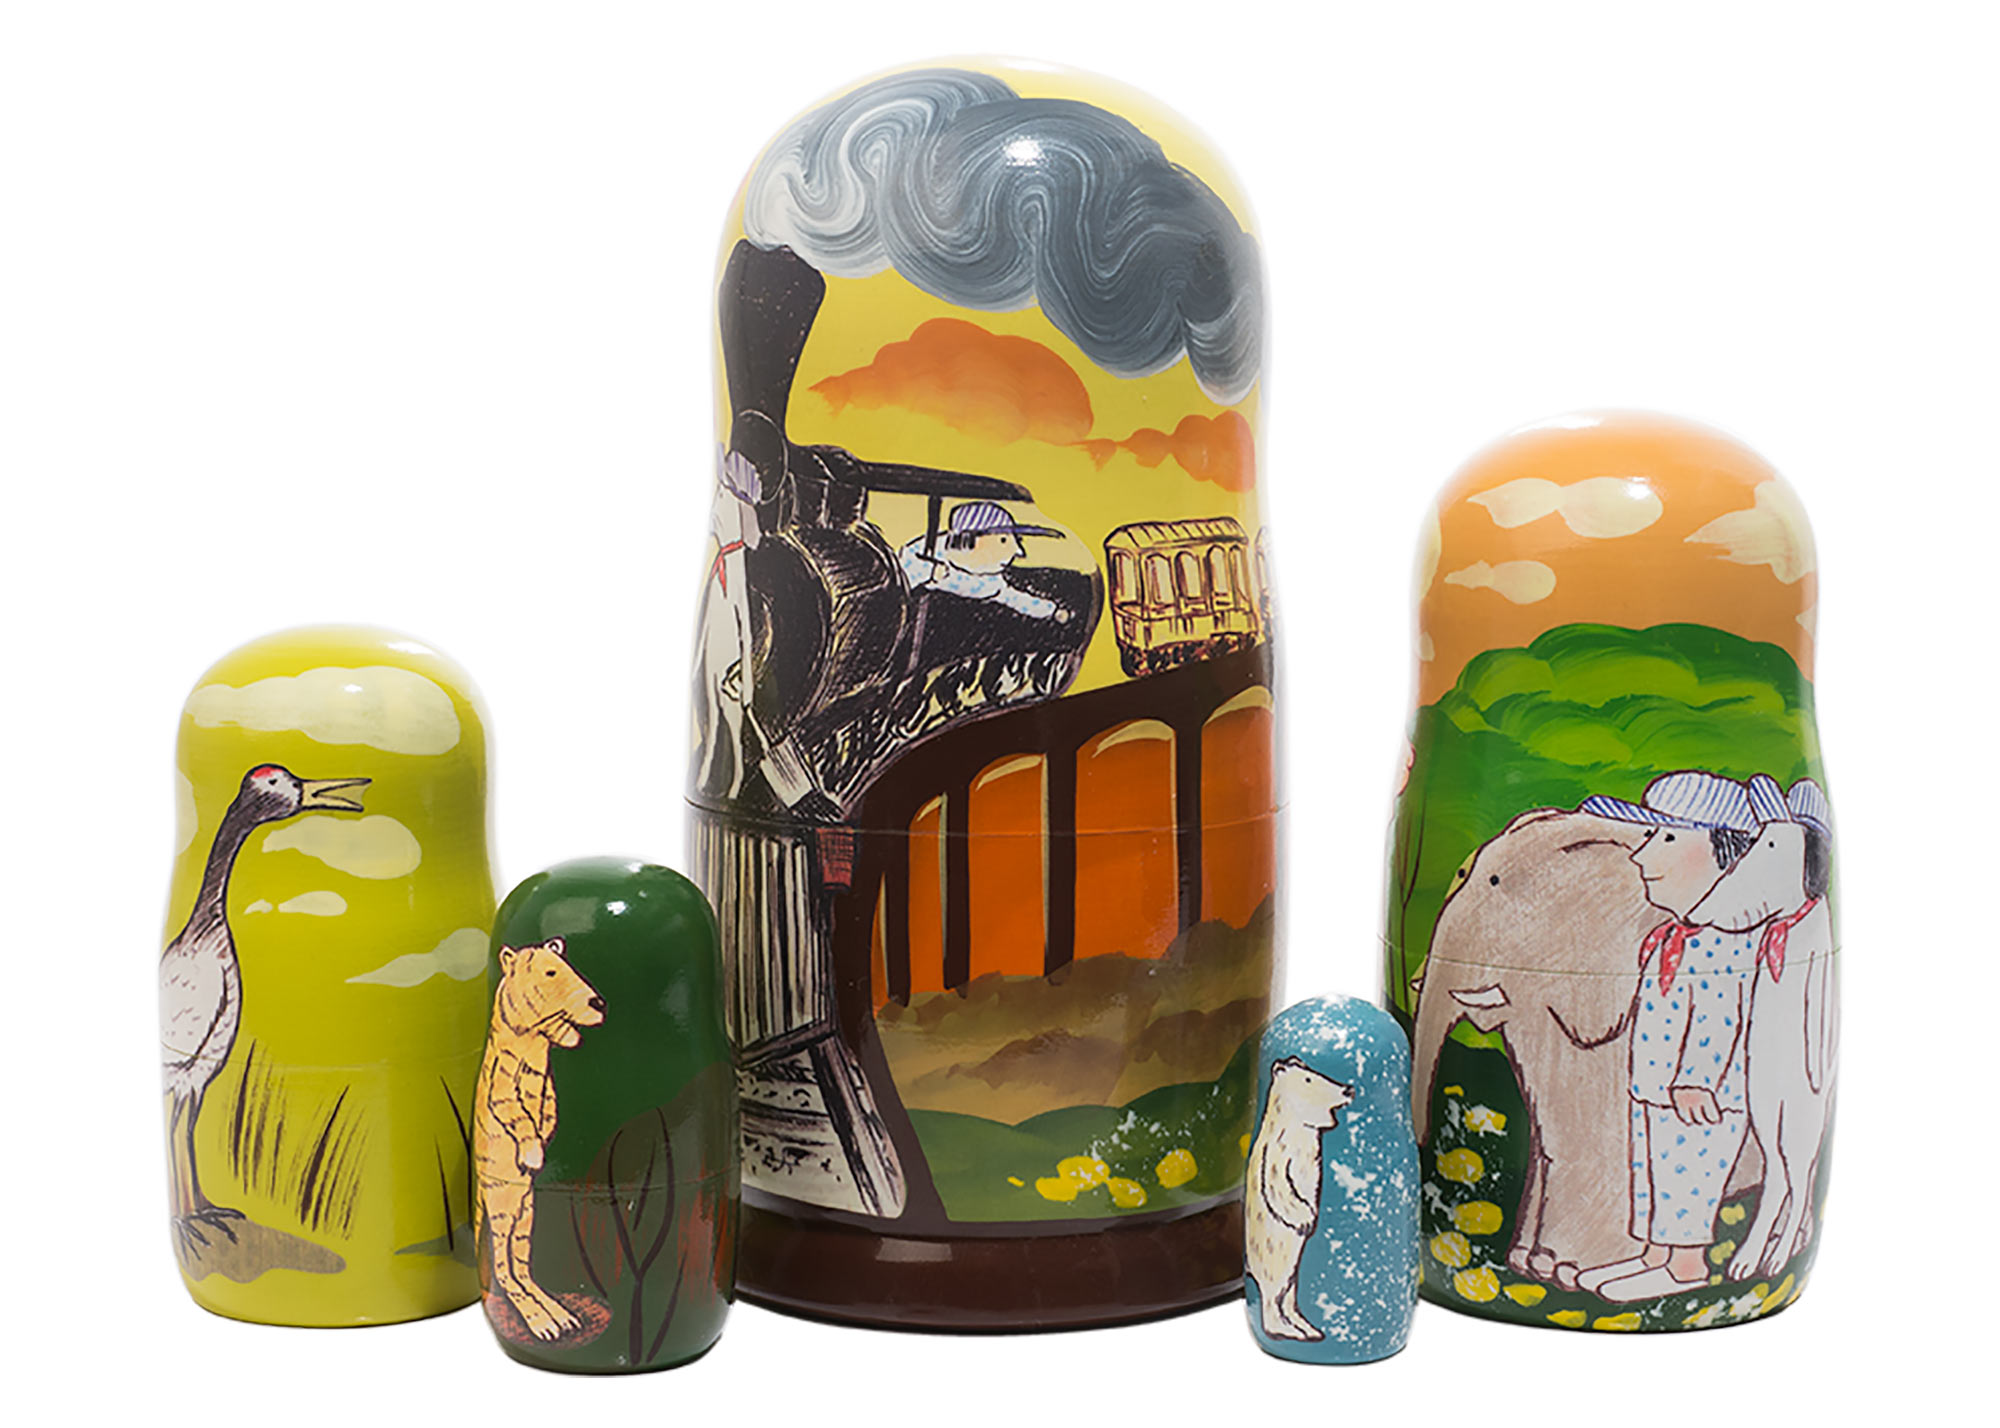 Buy Hey! Get Off Our Train! Nesting Doll 5pc./6" at GoldenCockerel.com